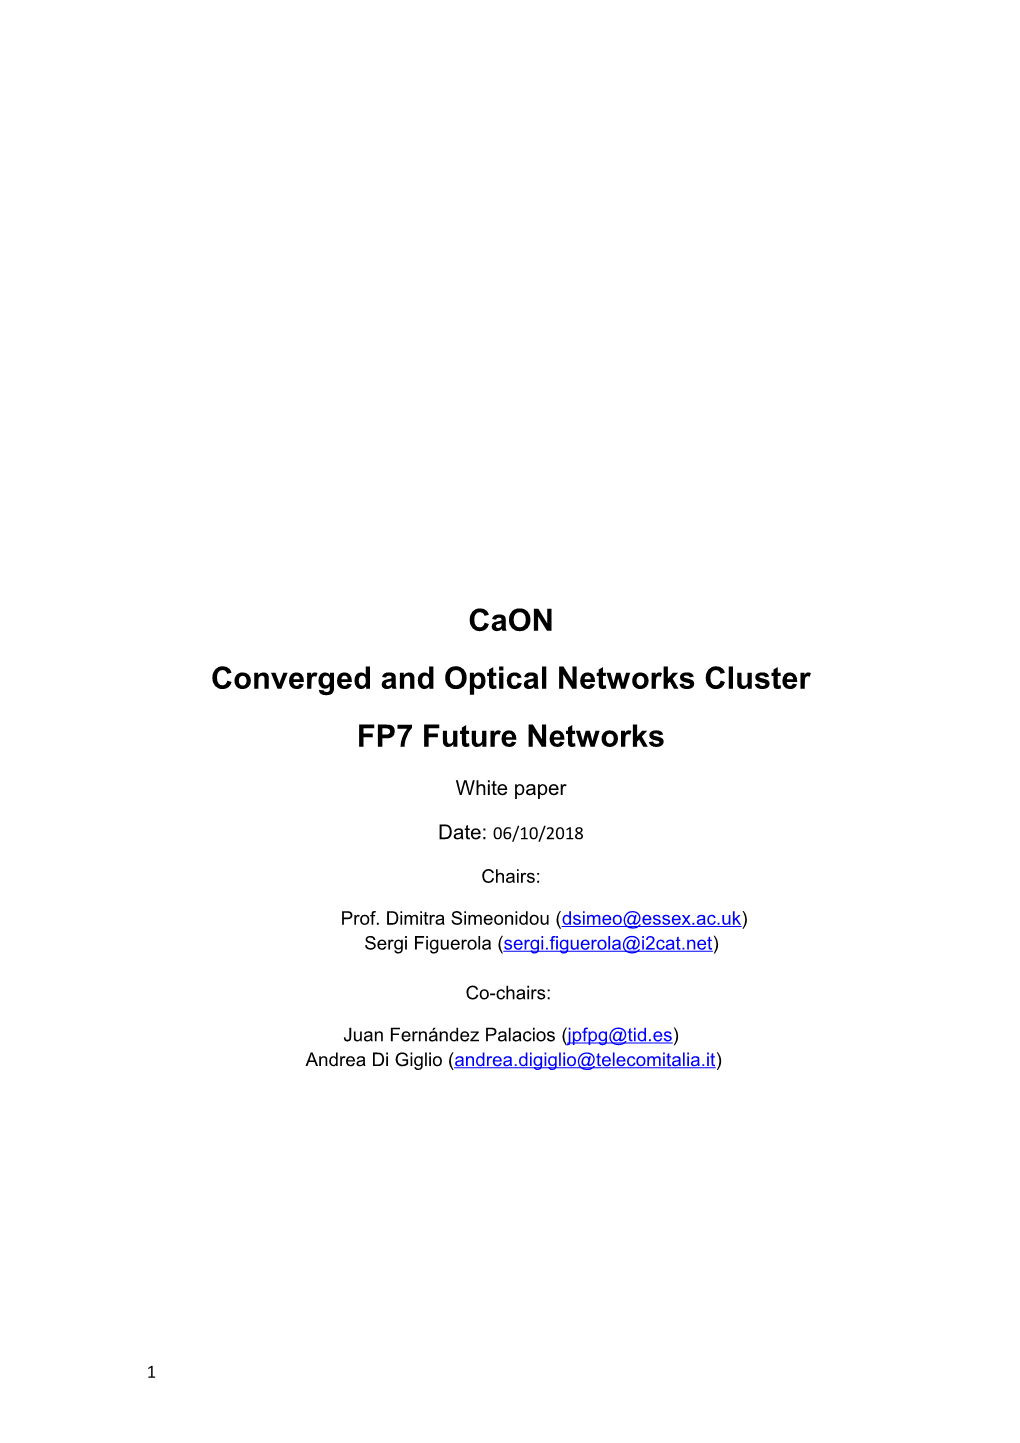 Converged and Optical Networks Cluster